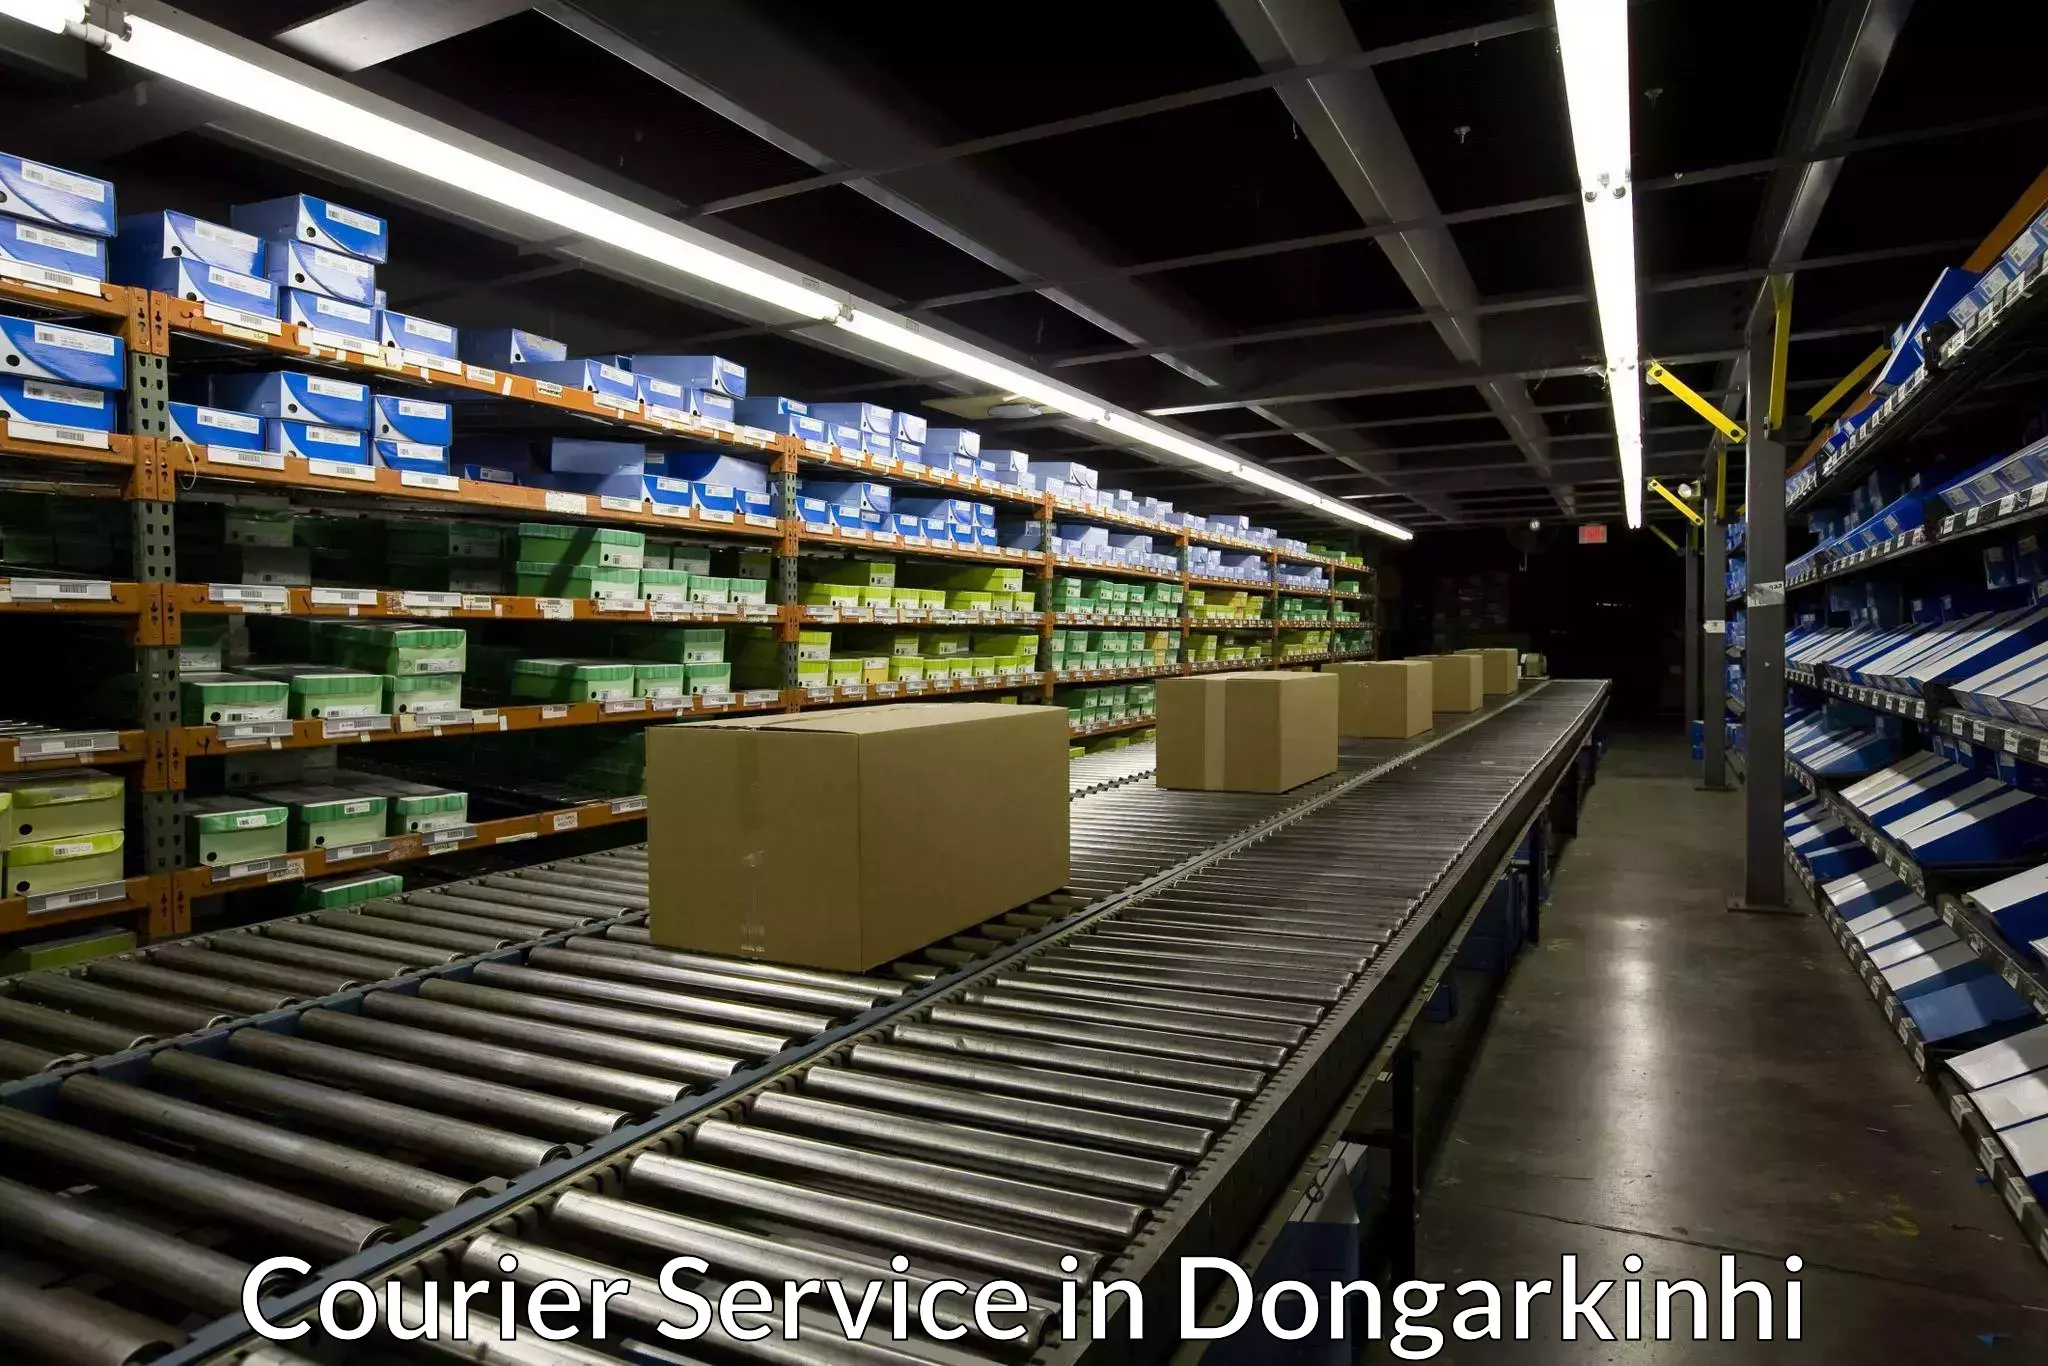 Optimized shipping services in Dongarkinhi